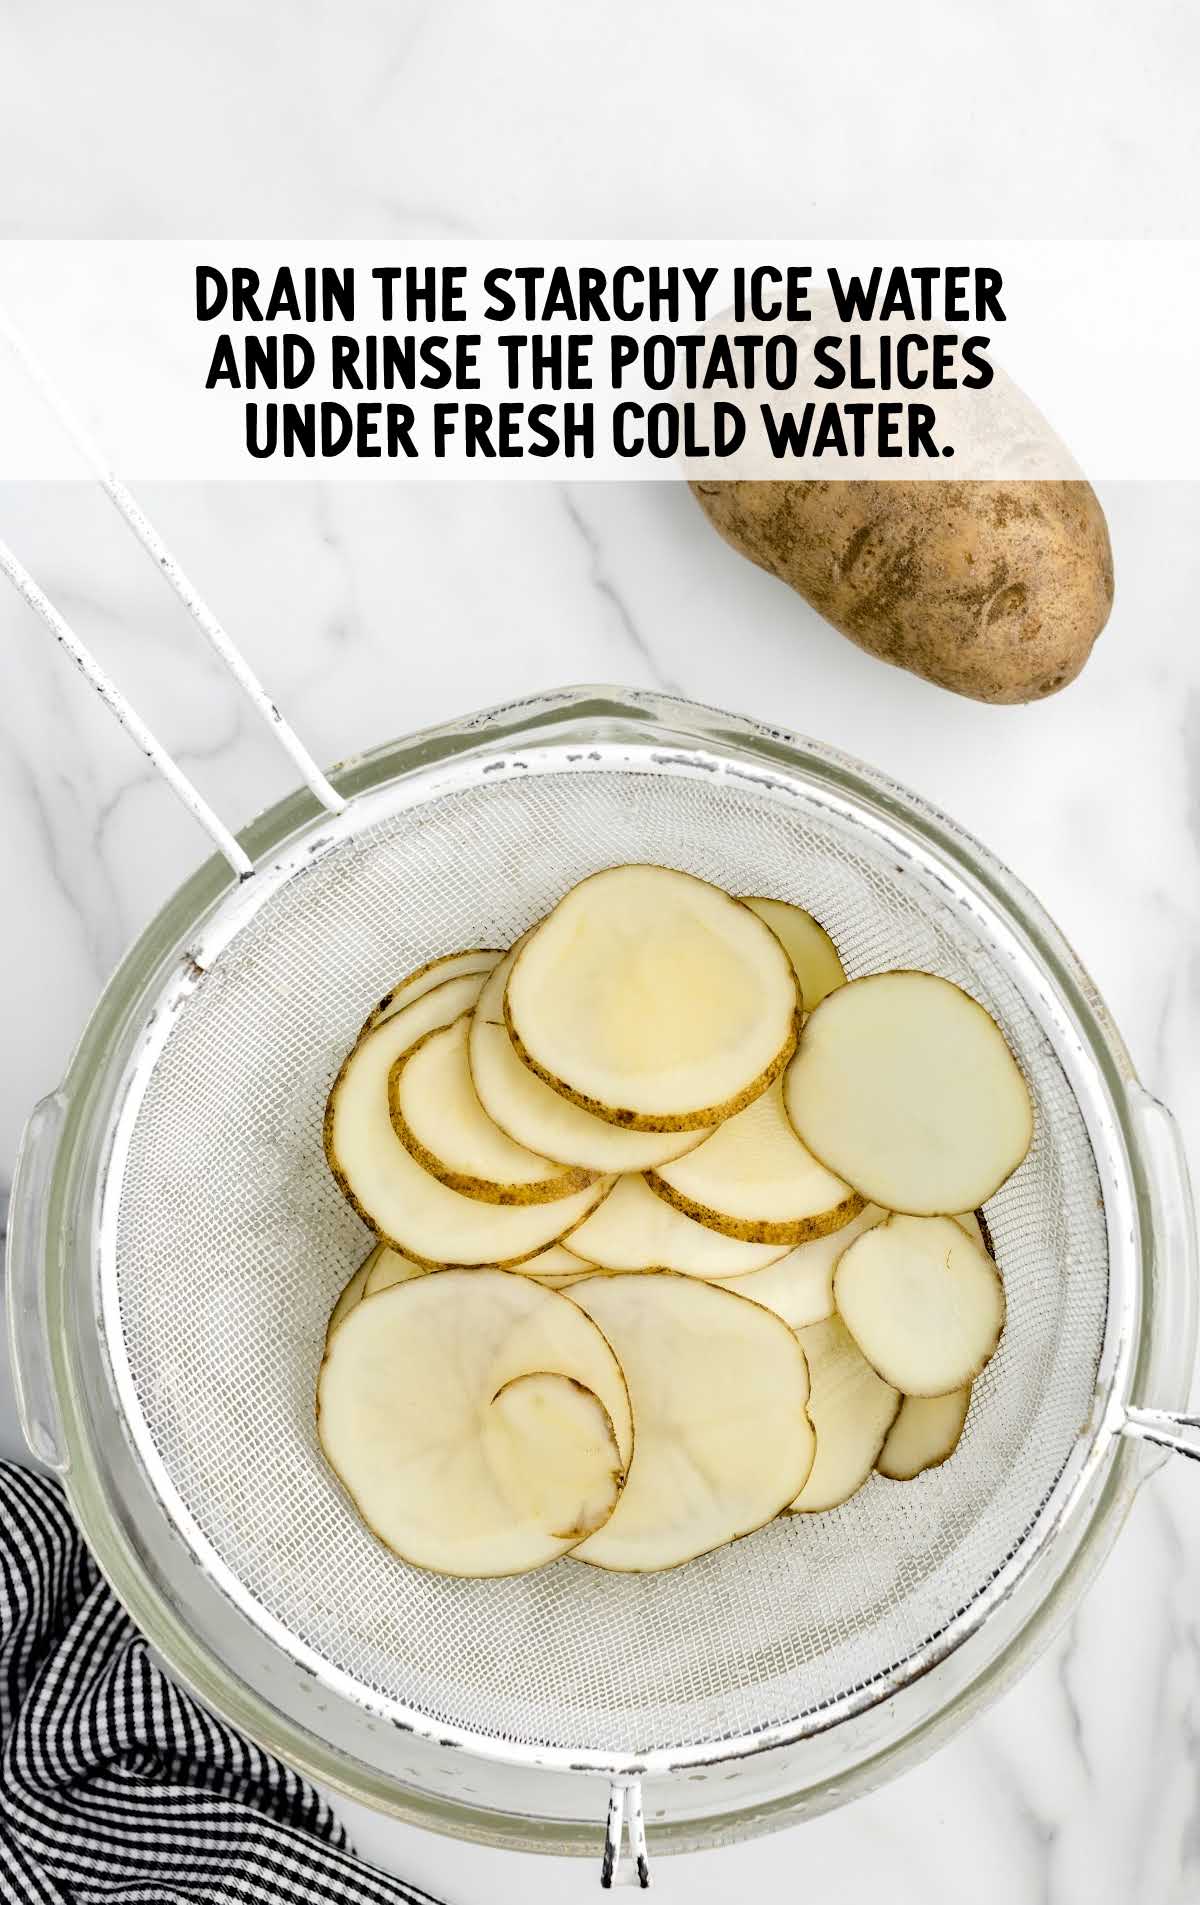 starchy ice water drained and potato slices rinsed